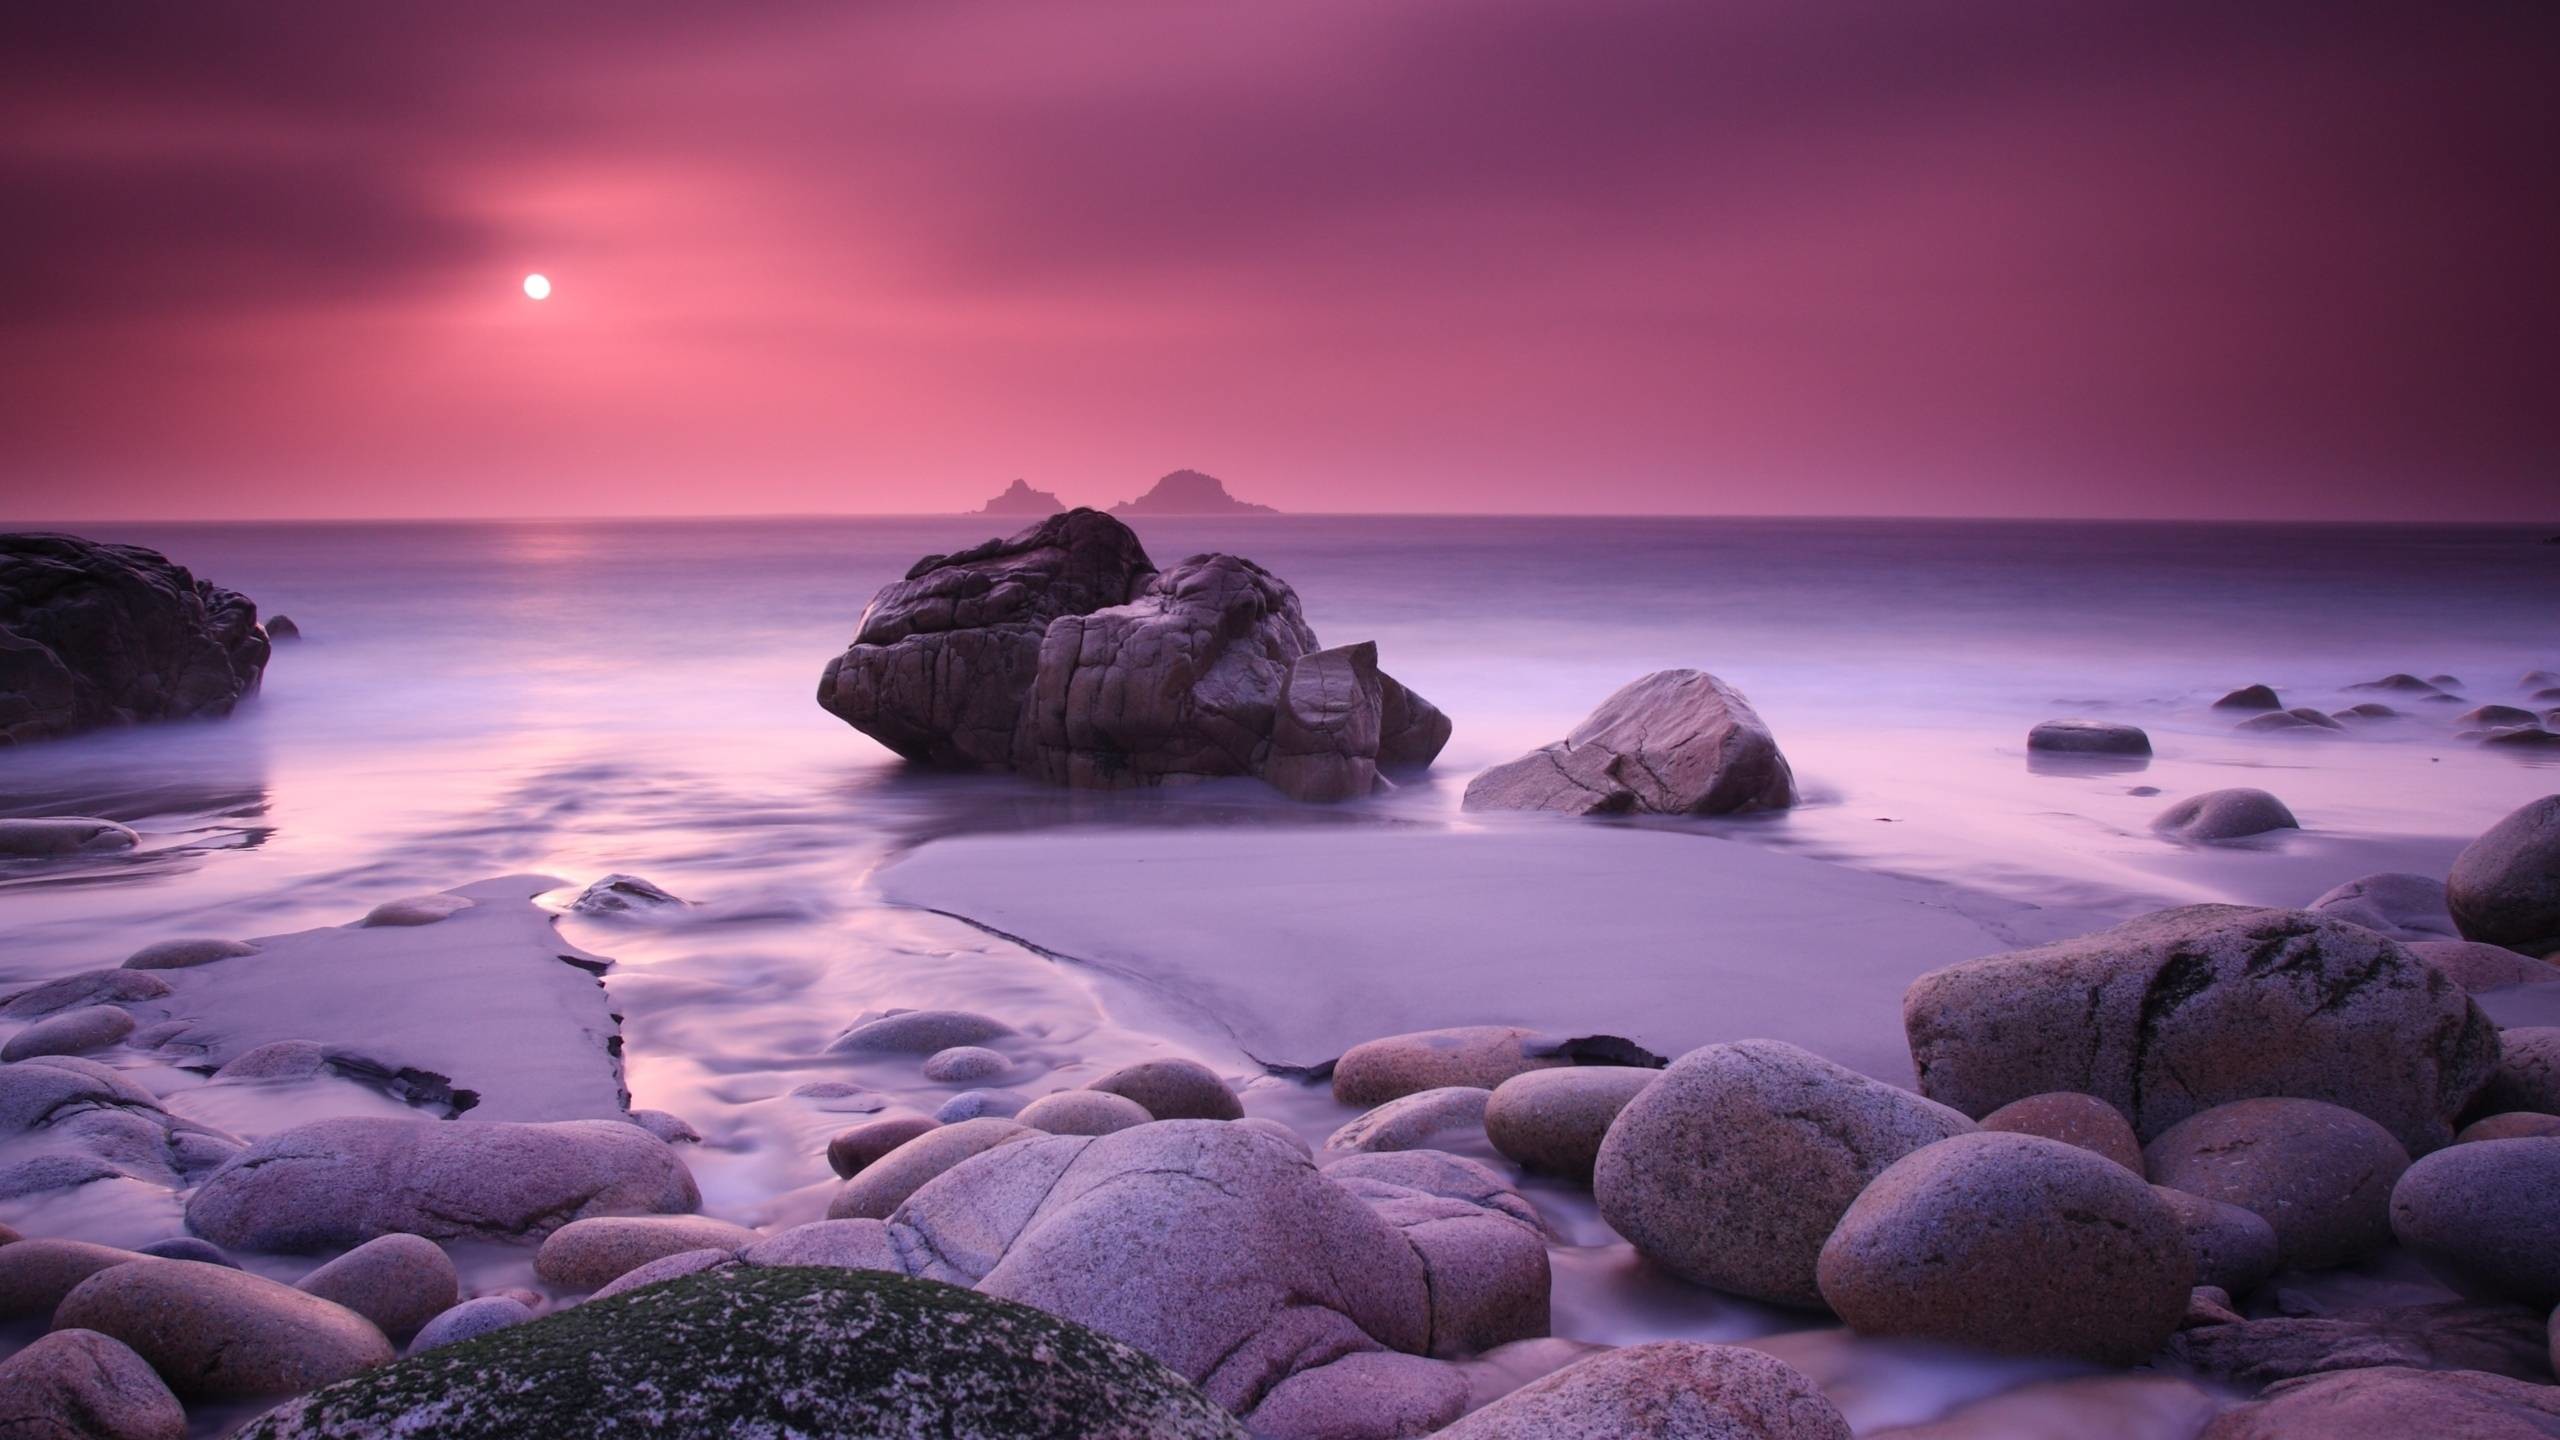 2560x1440 Pink Haze and Stones Wallpaper for Your iMac | HD Wallpapers Source